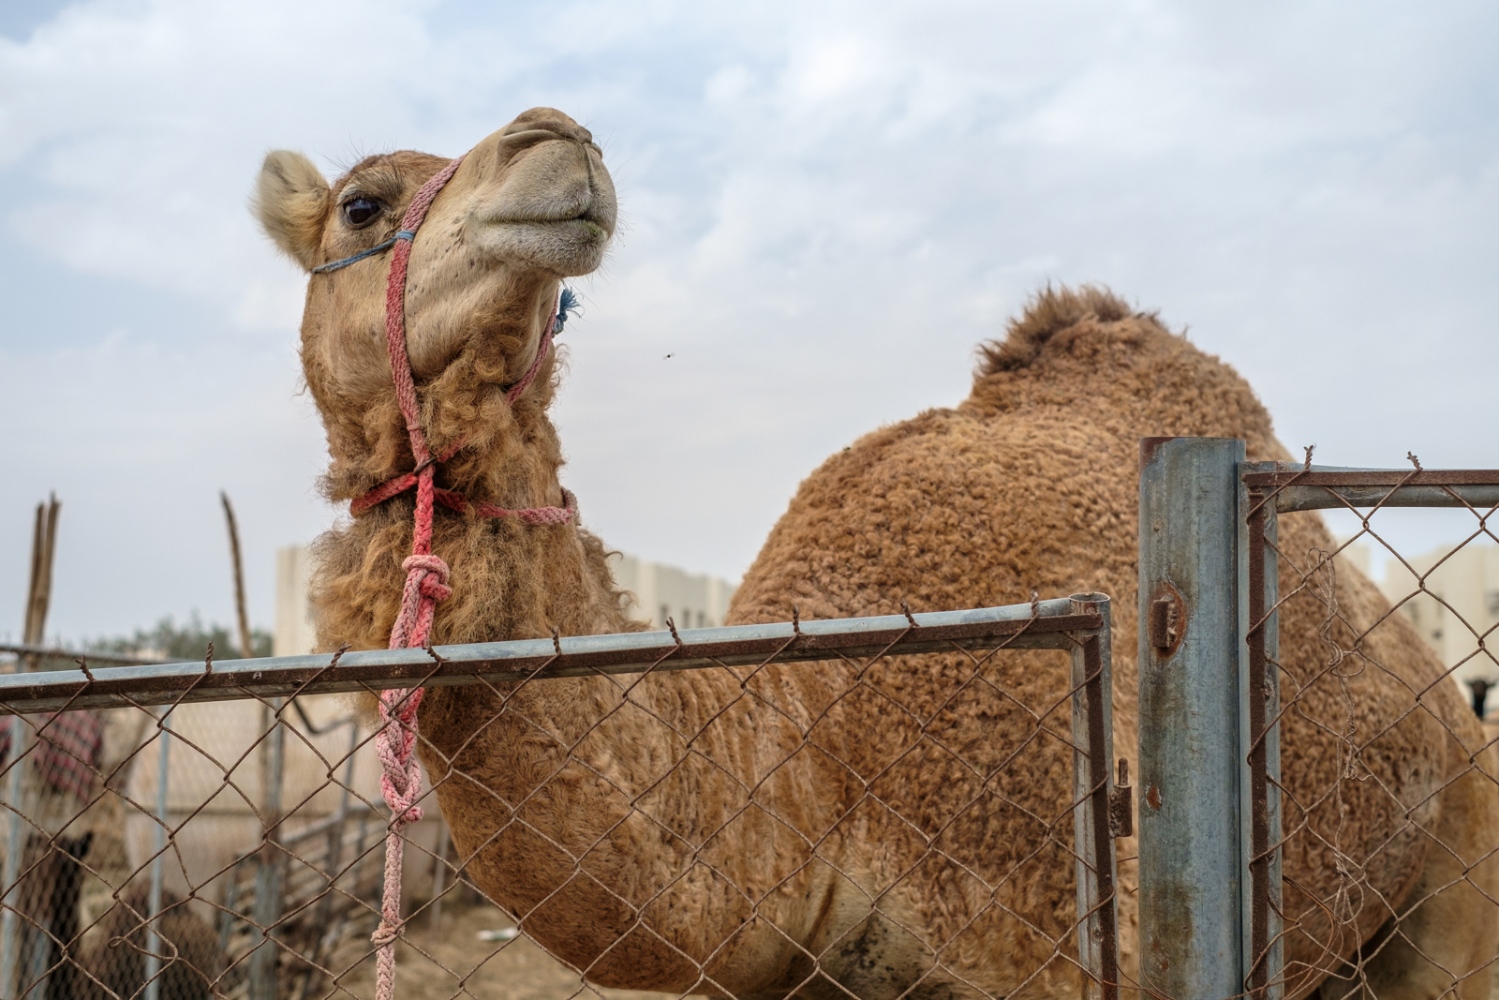  A camel waiting to be sold at ... curious and gorgeous animals. 